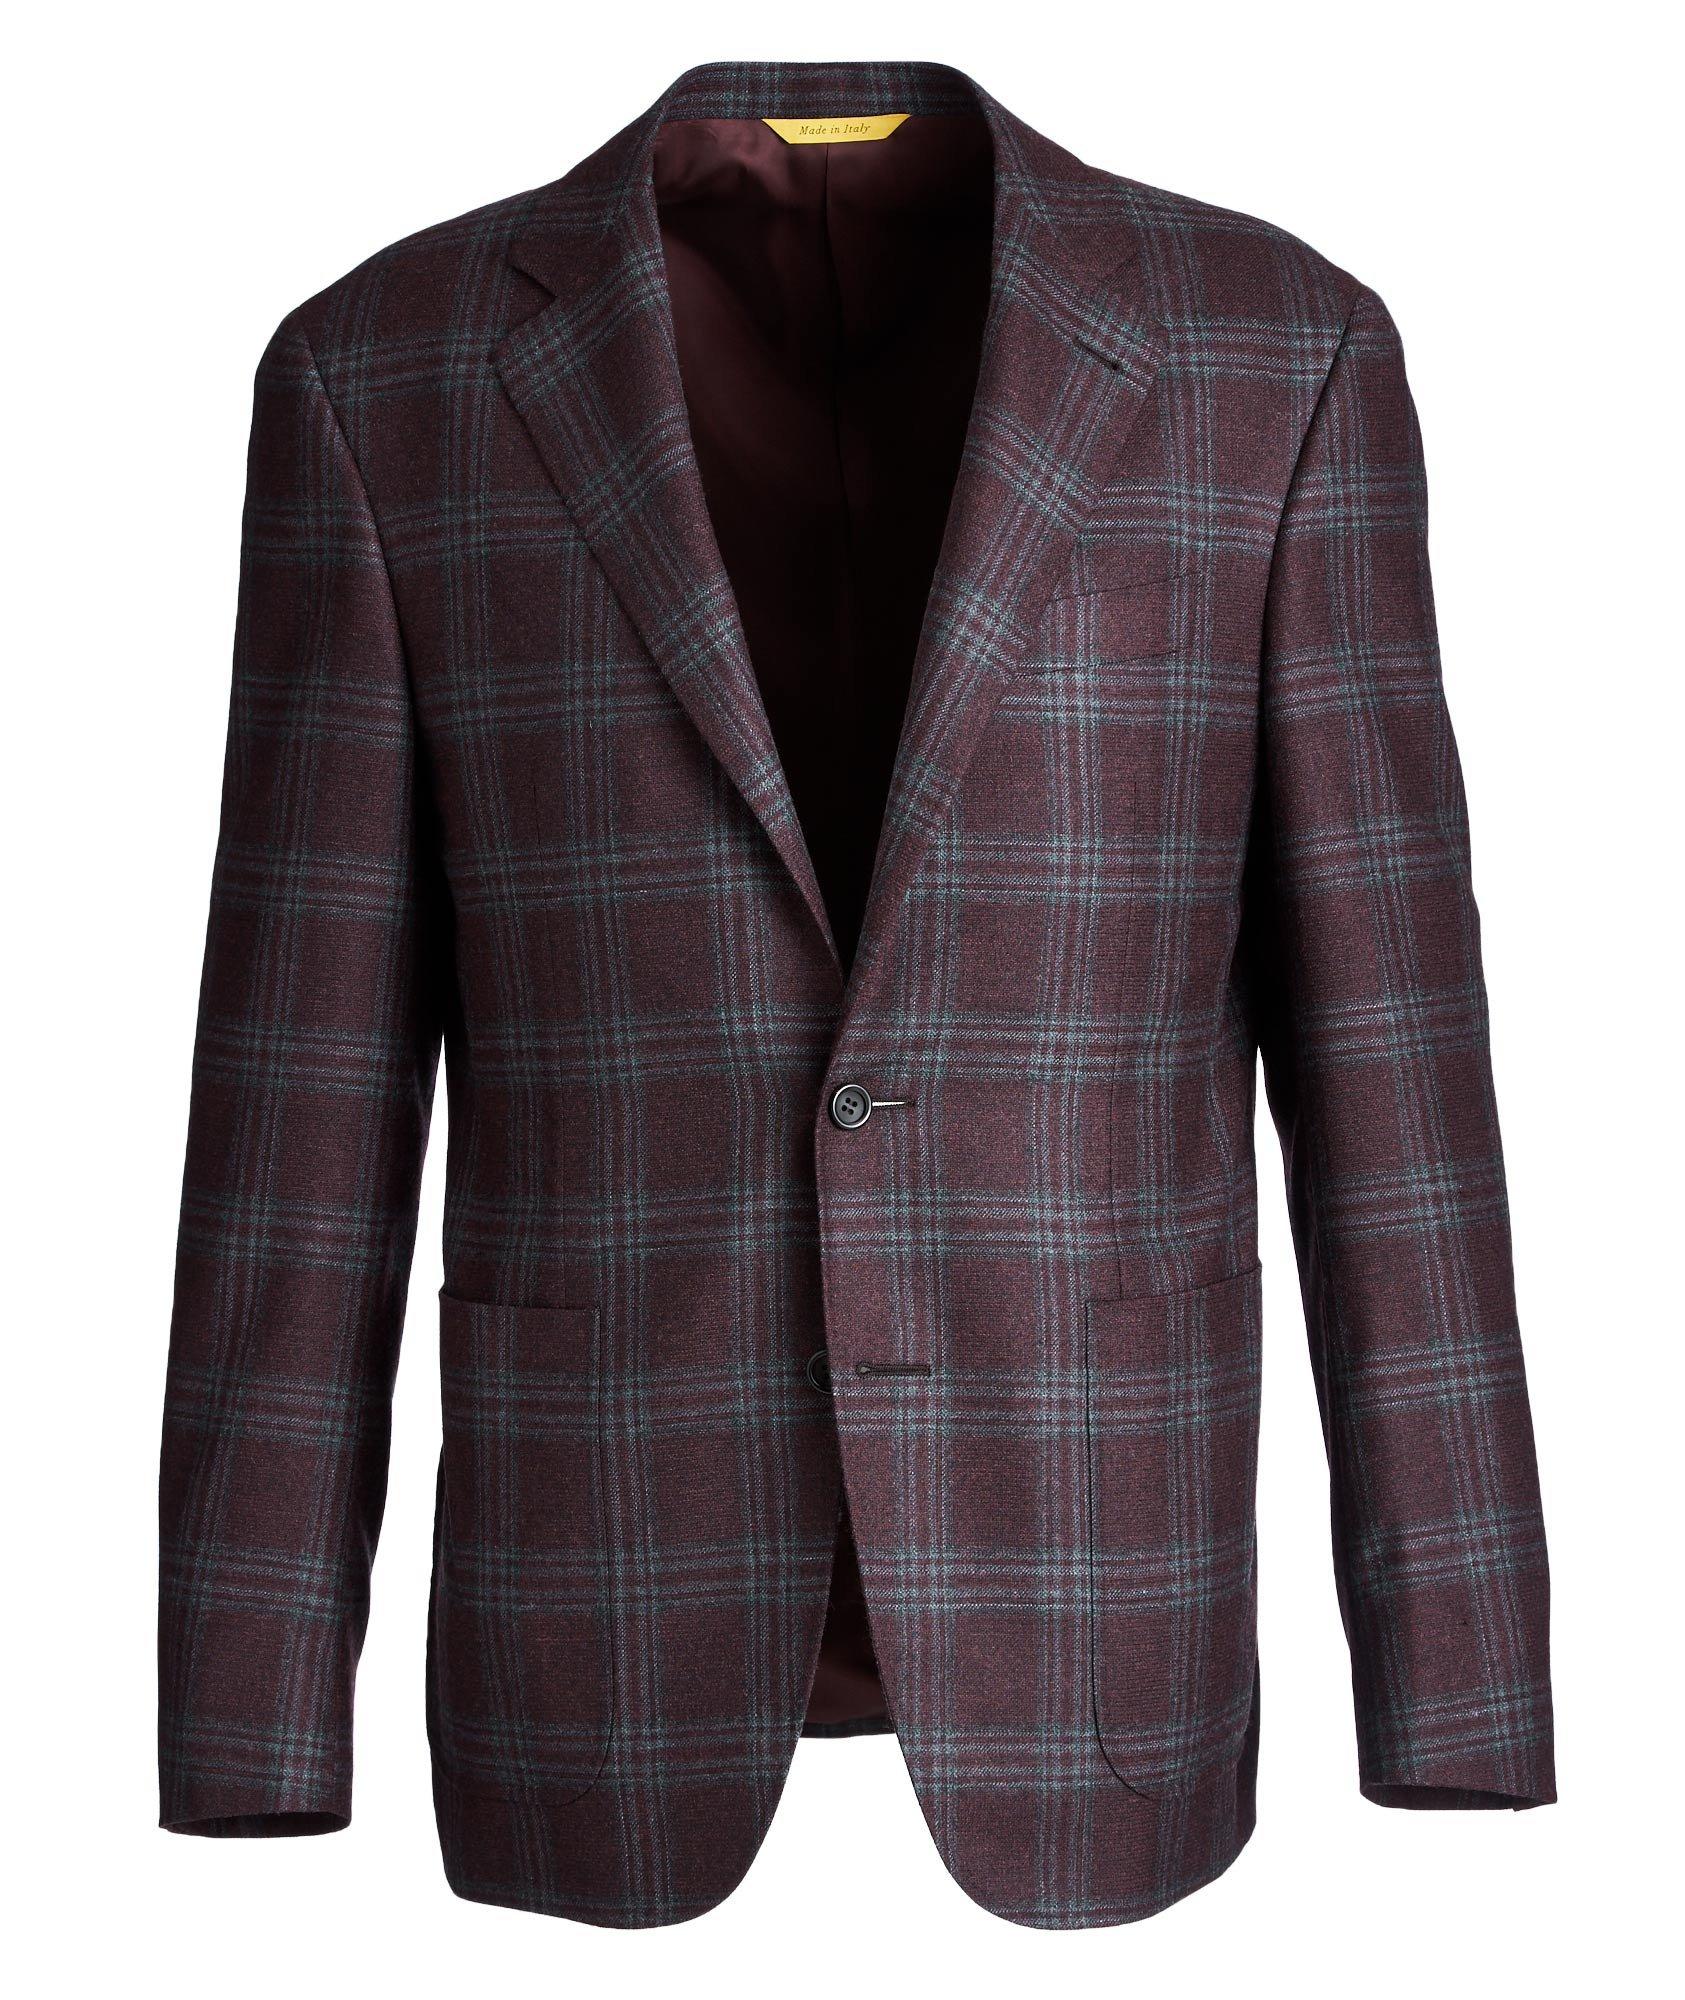 Kei Checked Wool-Cashmere Sports Jacket image 0